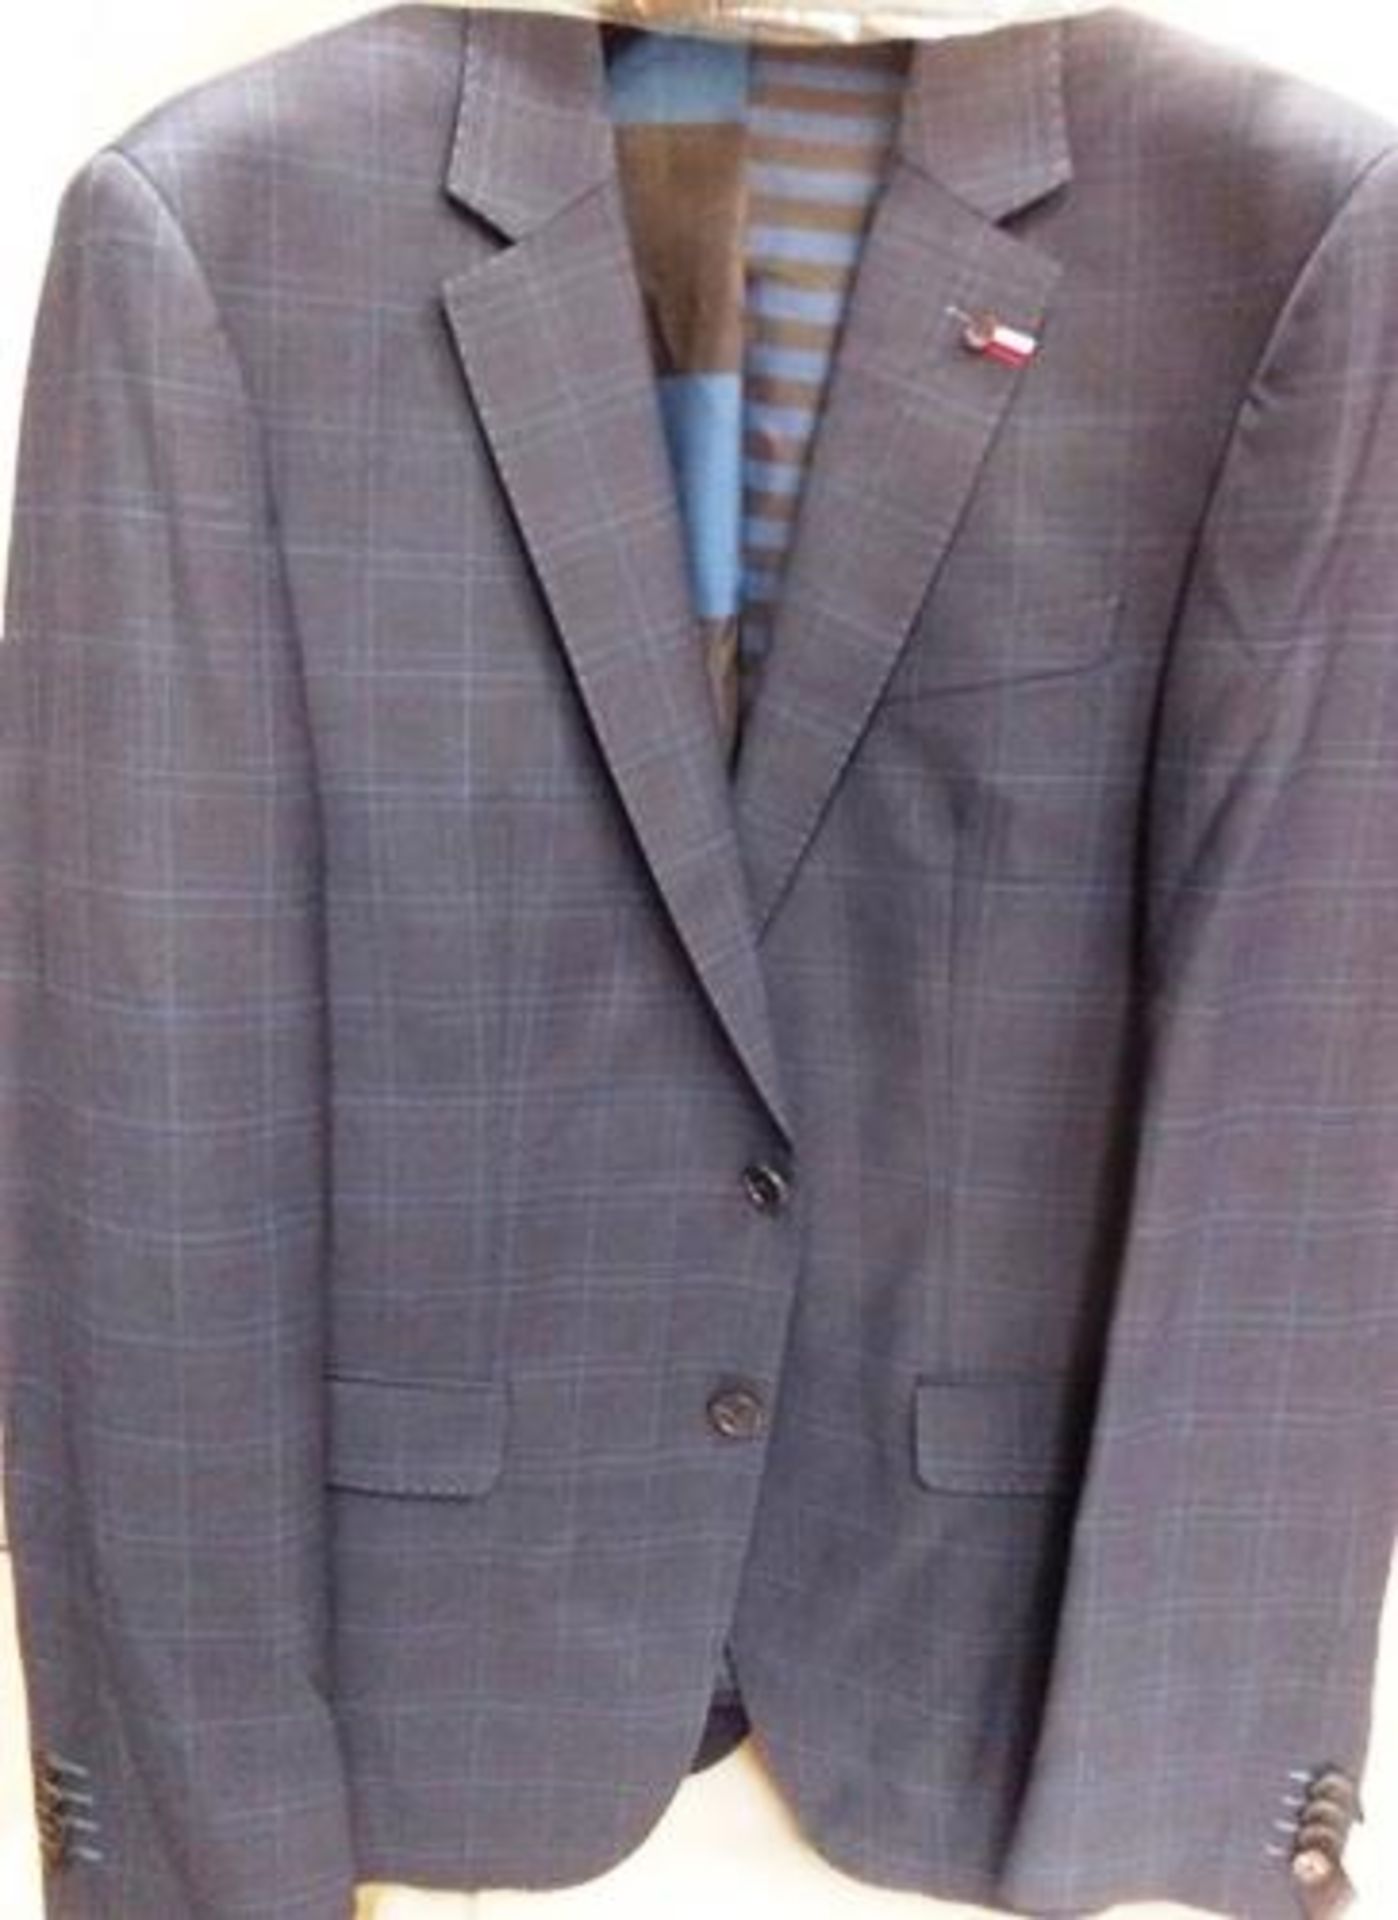 2 x Tommy Hilfiger check blazers, size 52 - New with tags (crail)